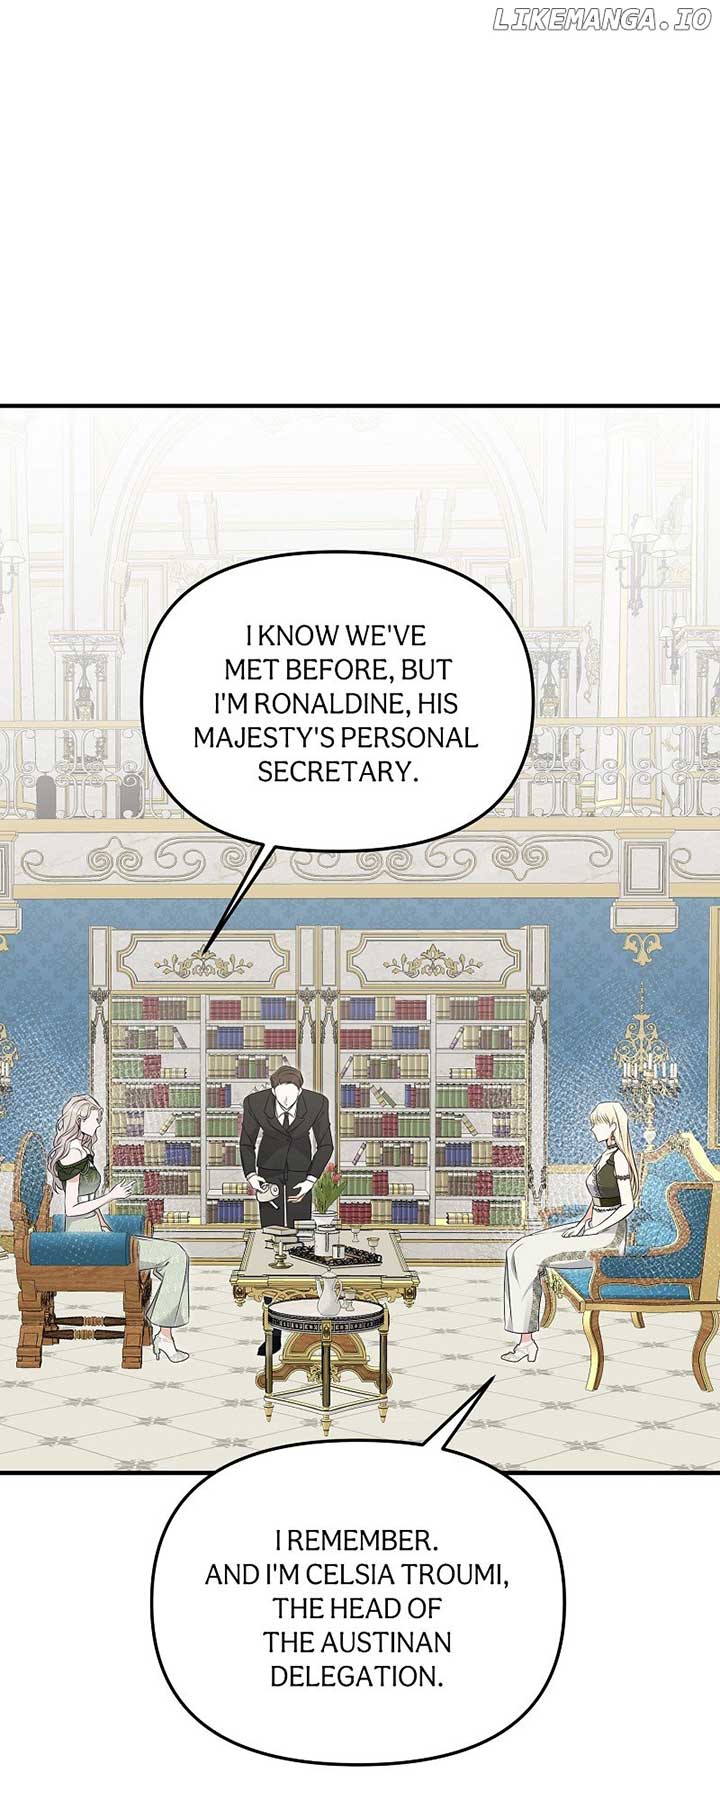 Survival of a Tyrant’s Secretary chapter 20